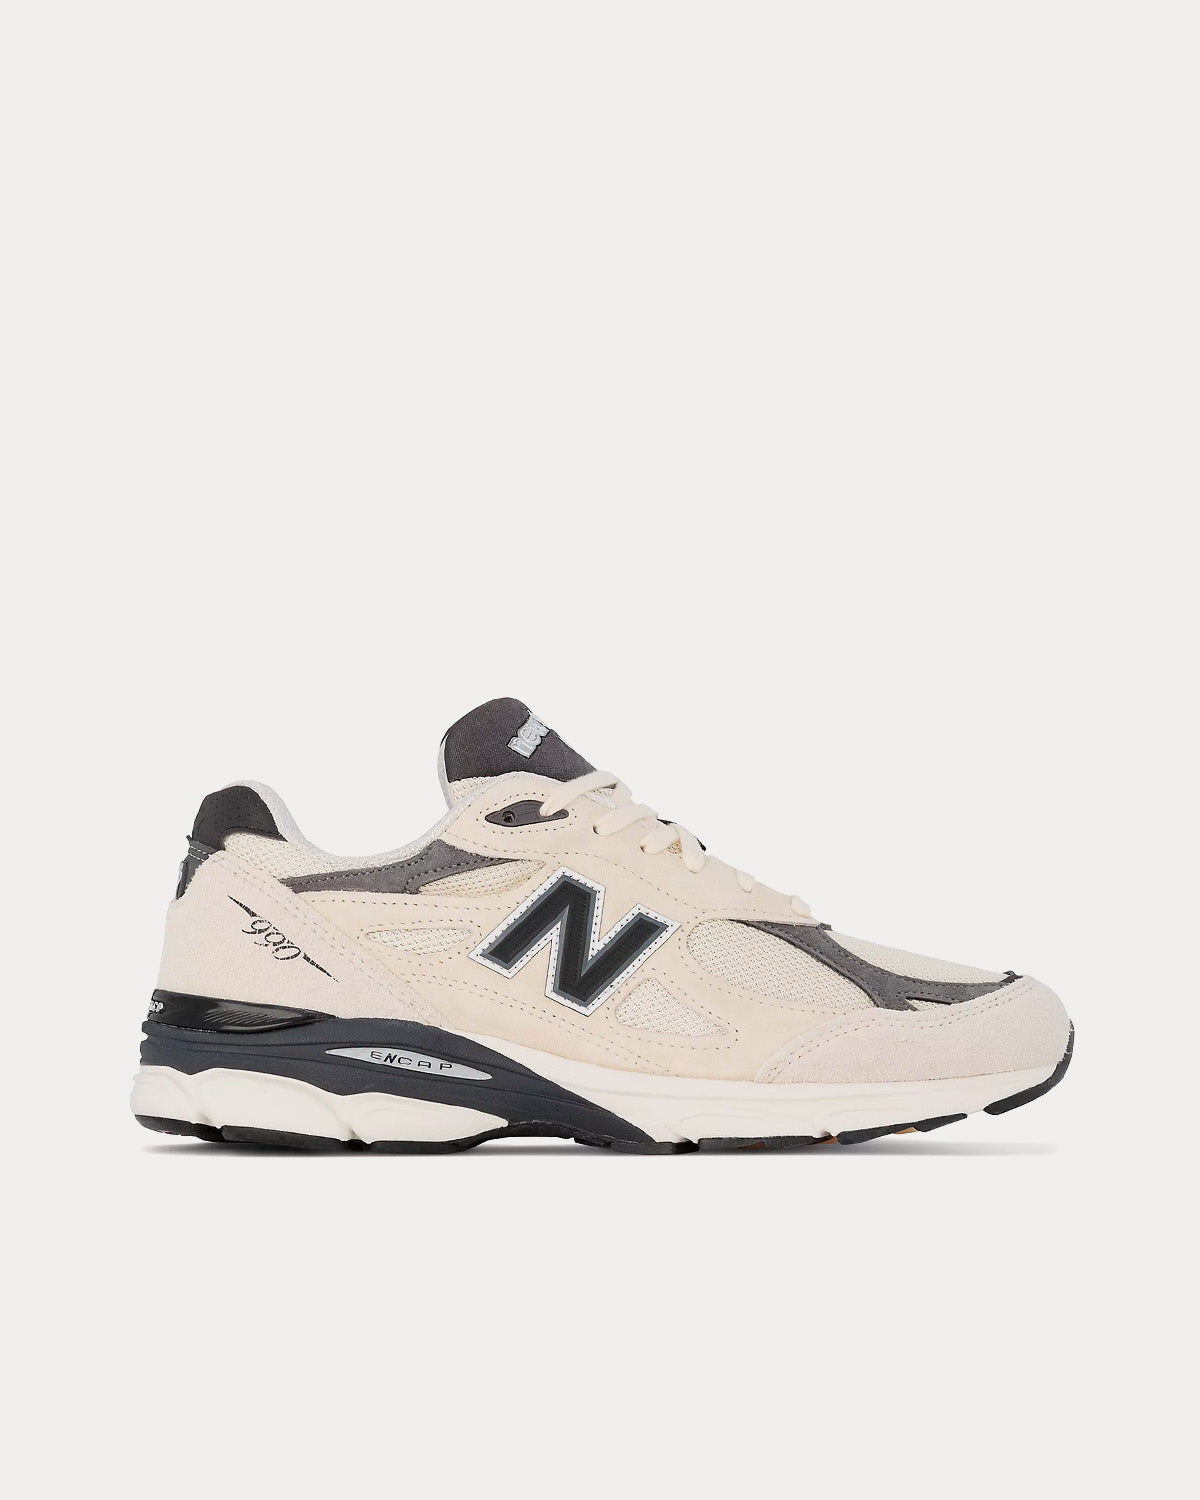 New Balance MADE in USA 990v3 Moonbeam with Macadamia Nut Low Top ...